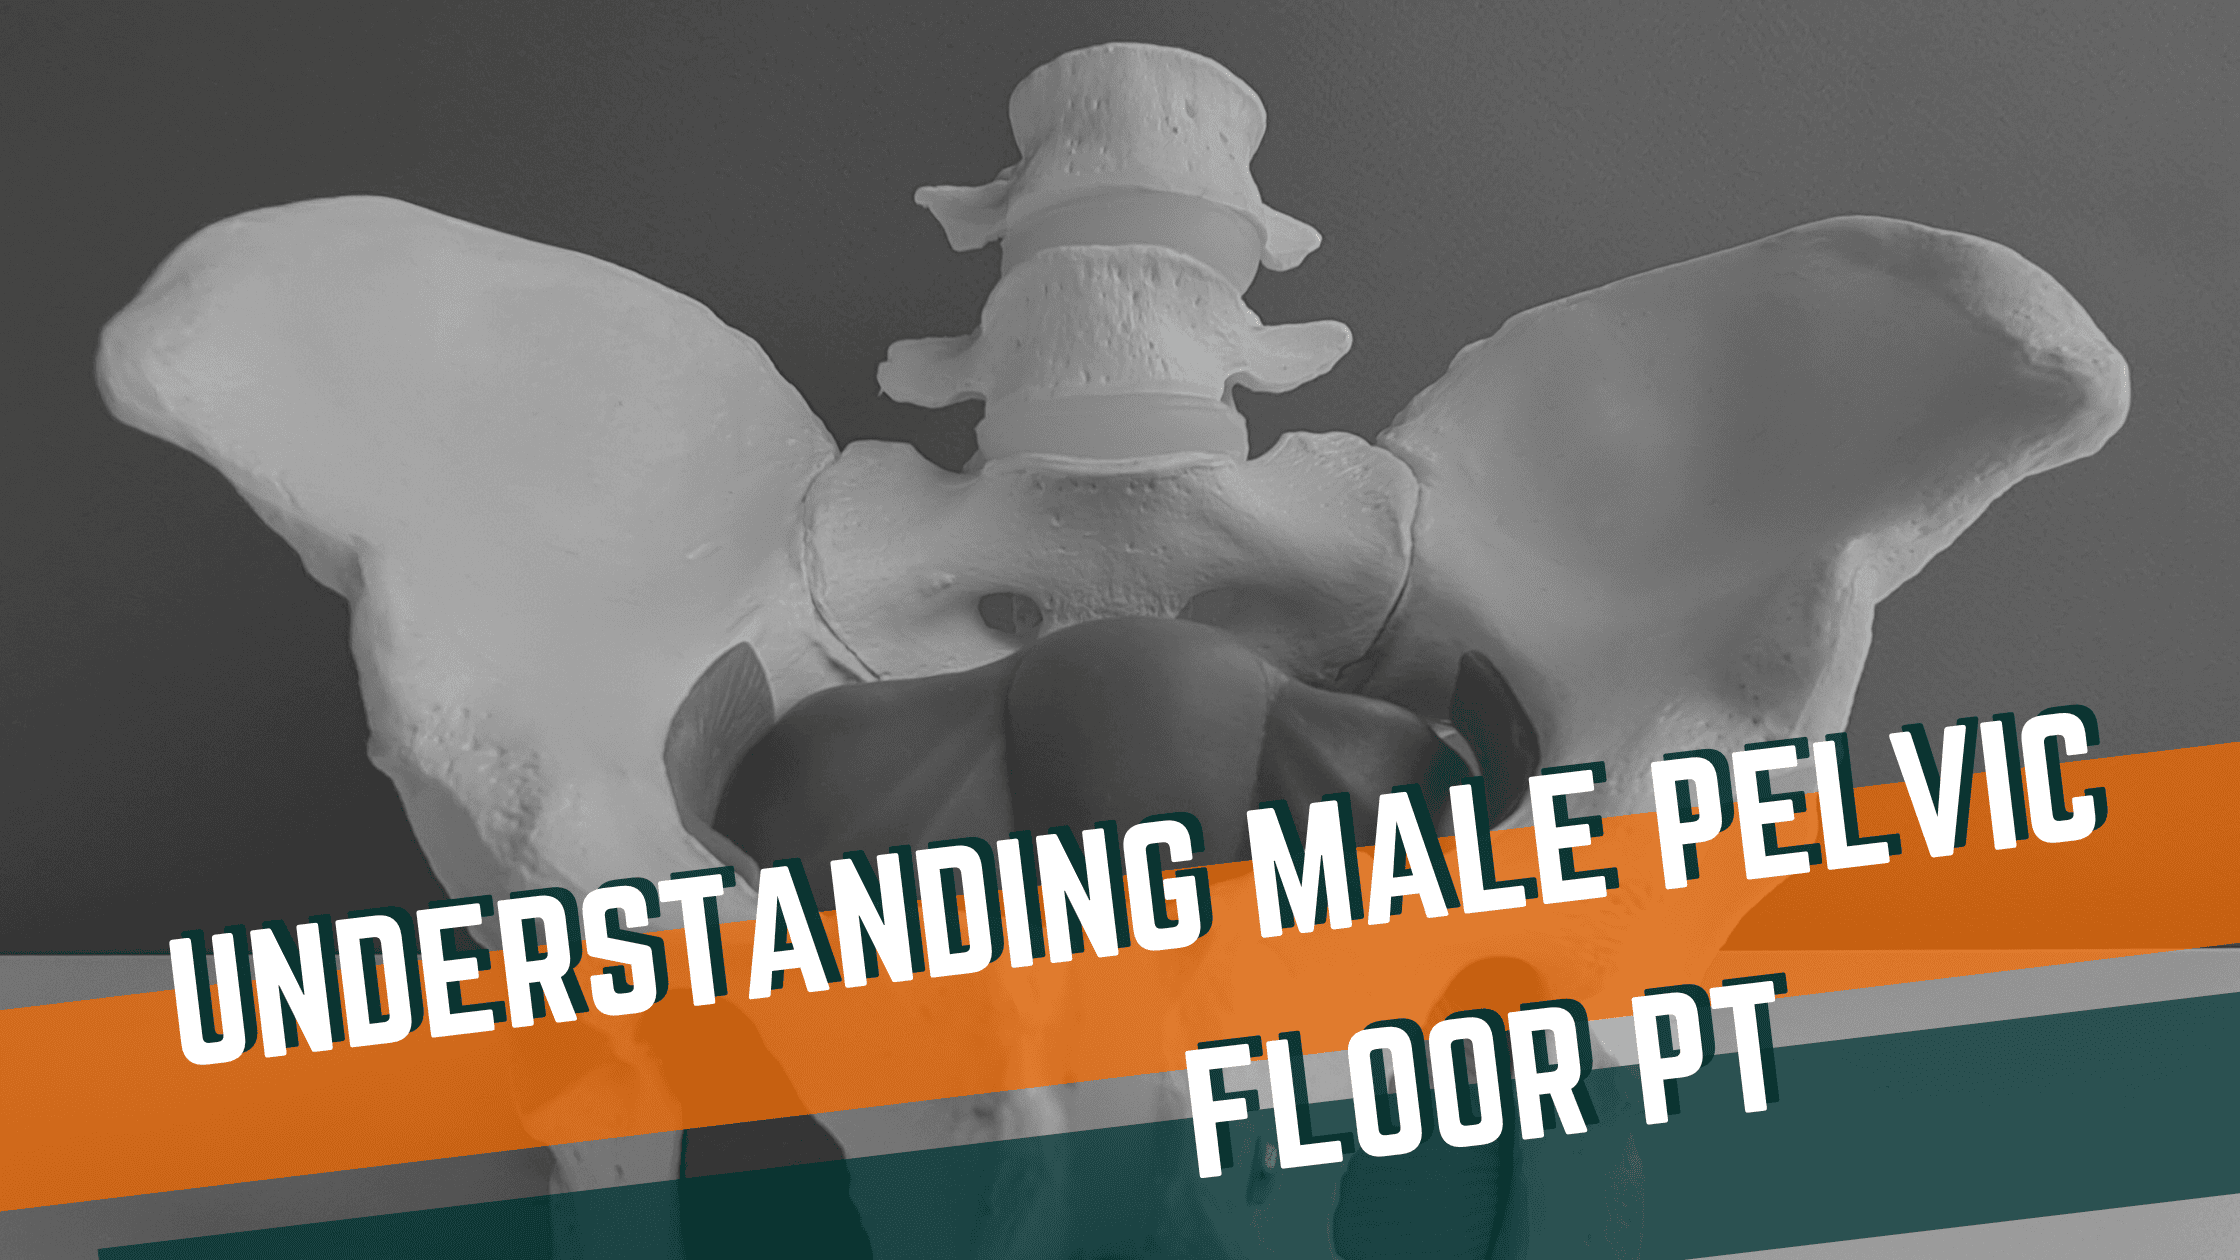 Featured image for “Understanding Male Pelvic Floor Physical Therapy”